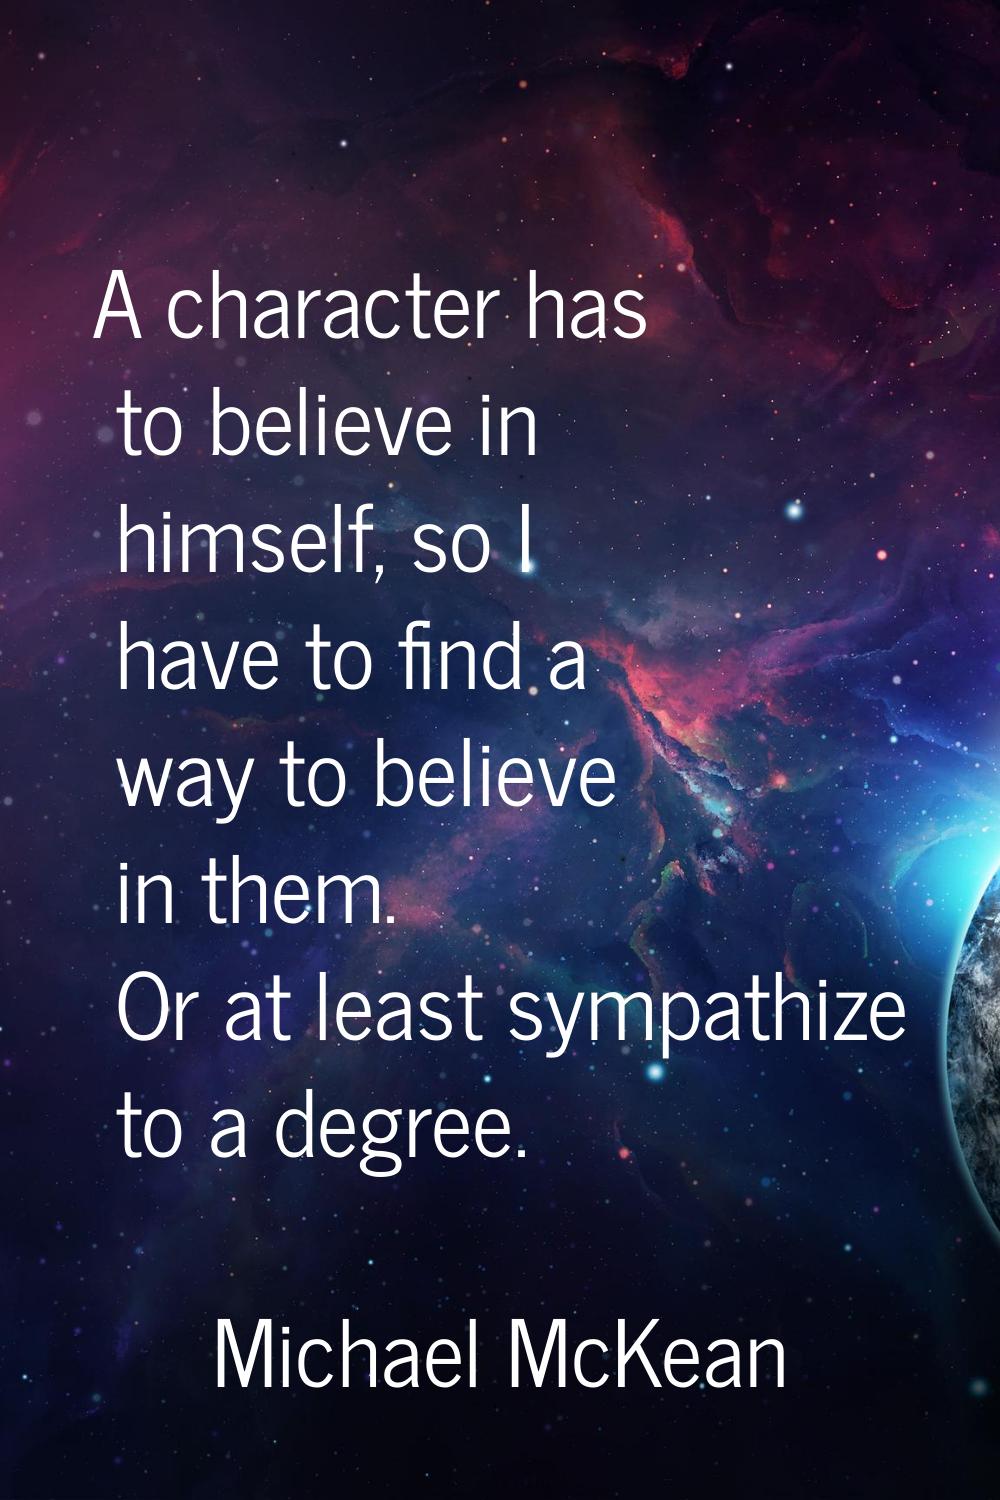 A character has to believe in himself, so I have to find a way to believe in them. Or at least symp